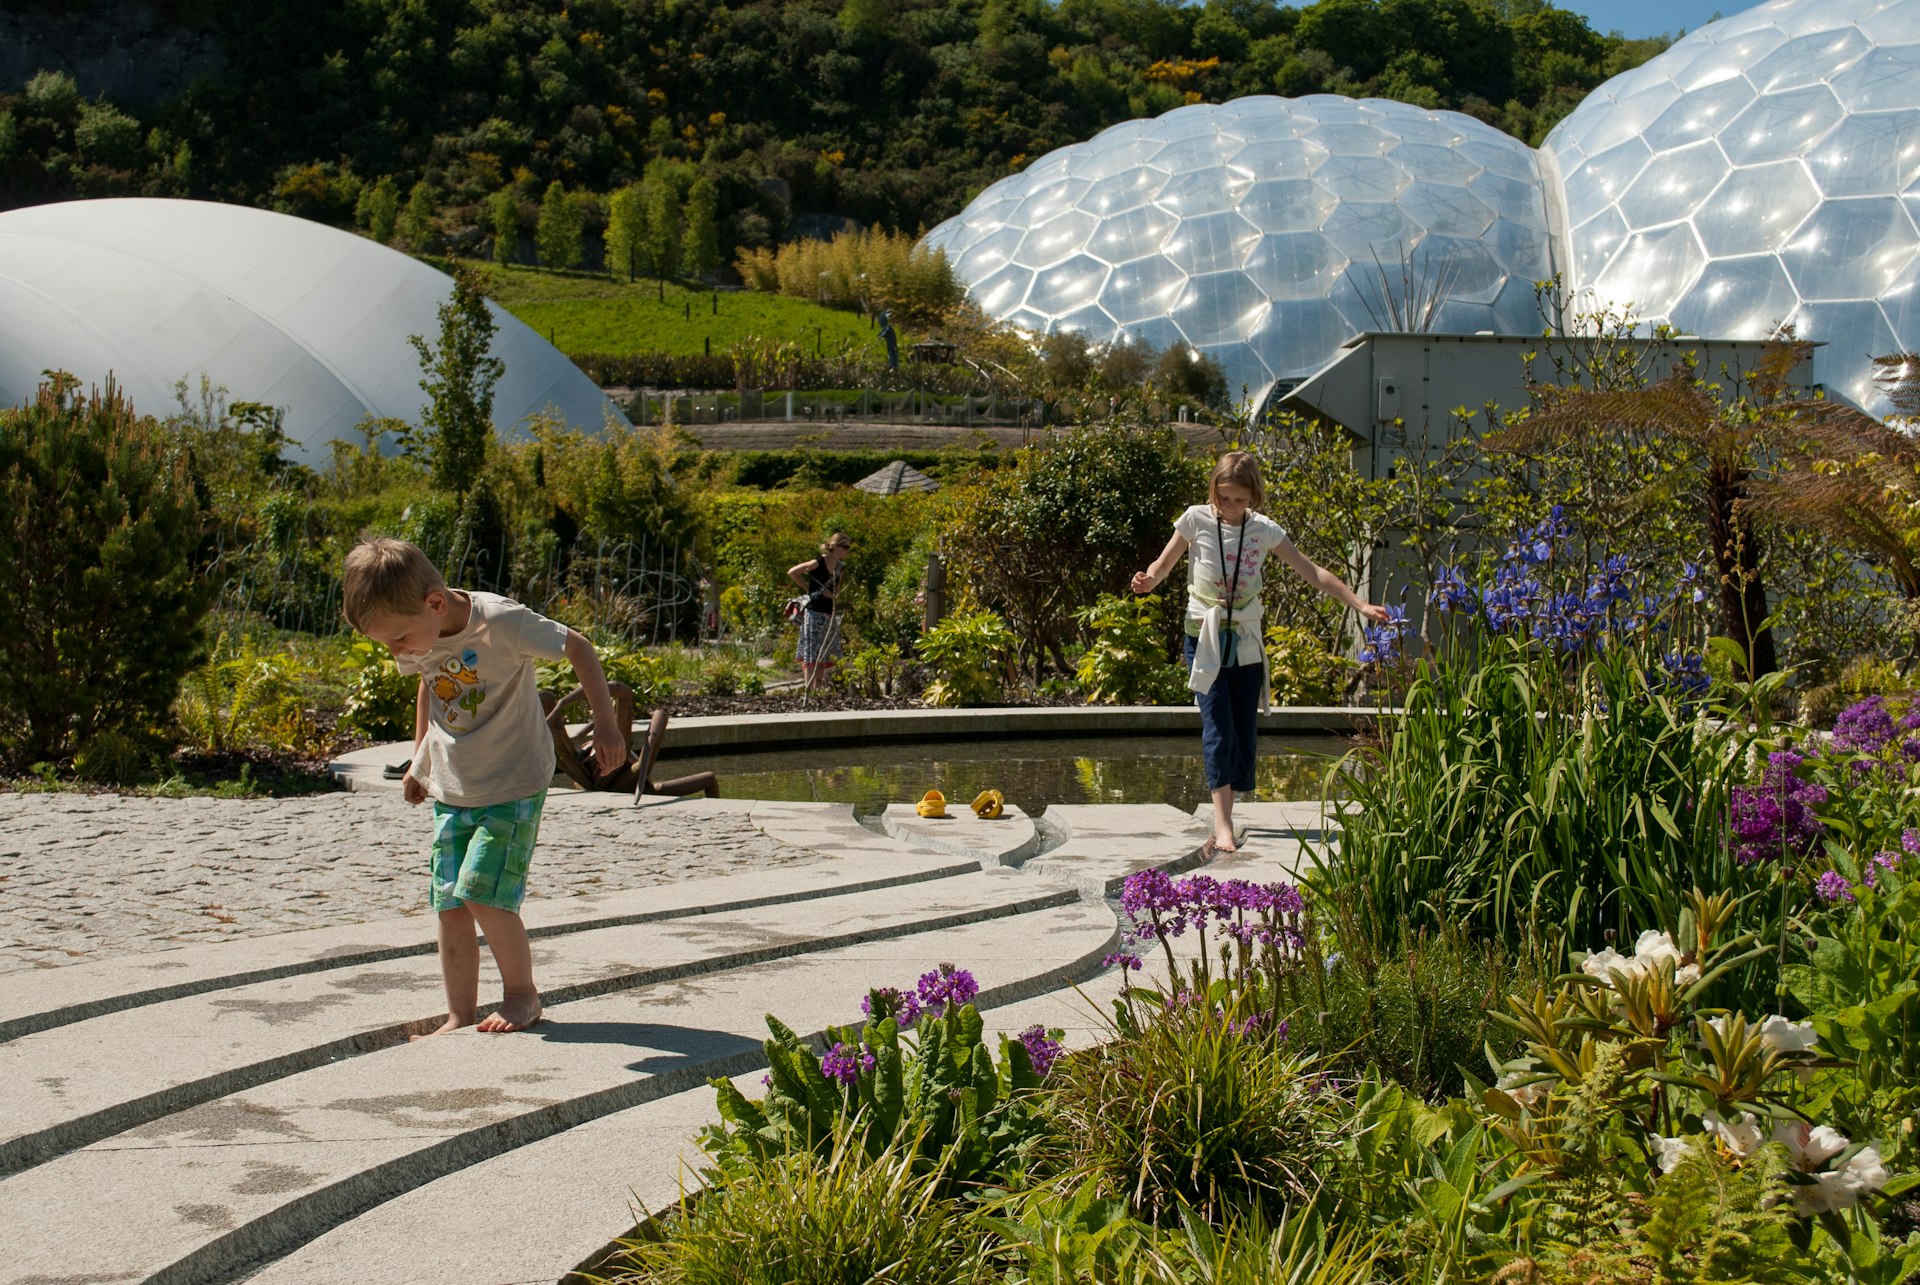 Two young children play in the gardens surrounding huge domes at Eden Project, Cornwall